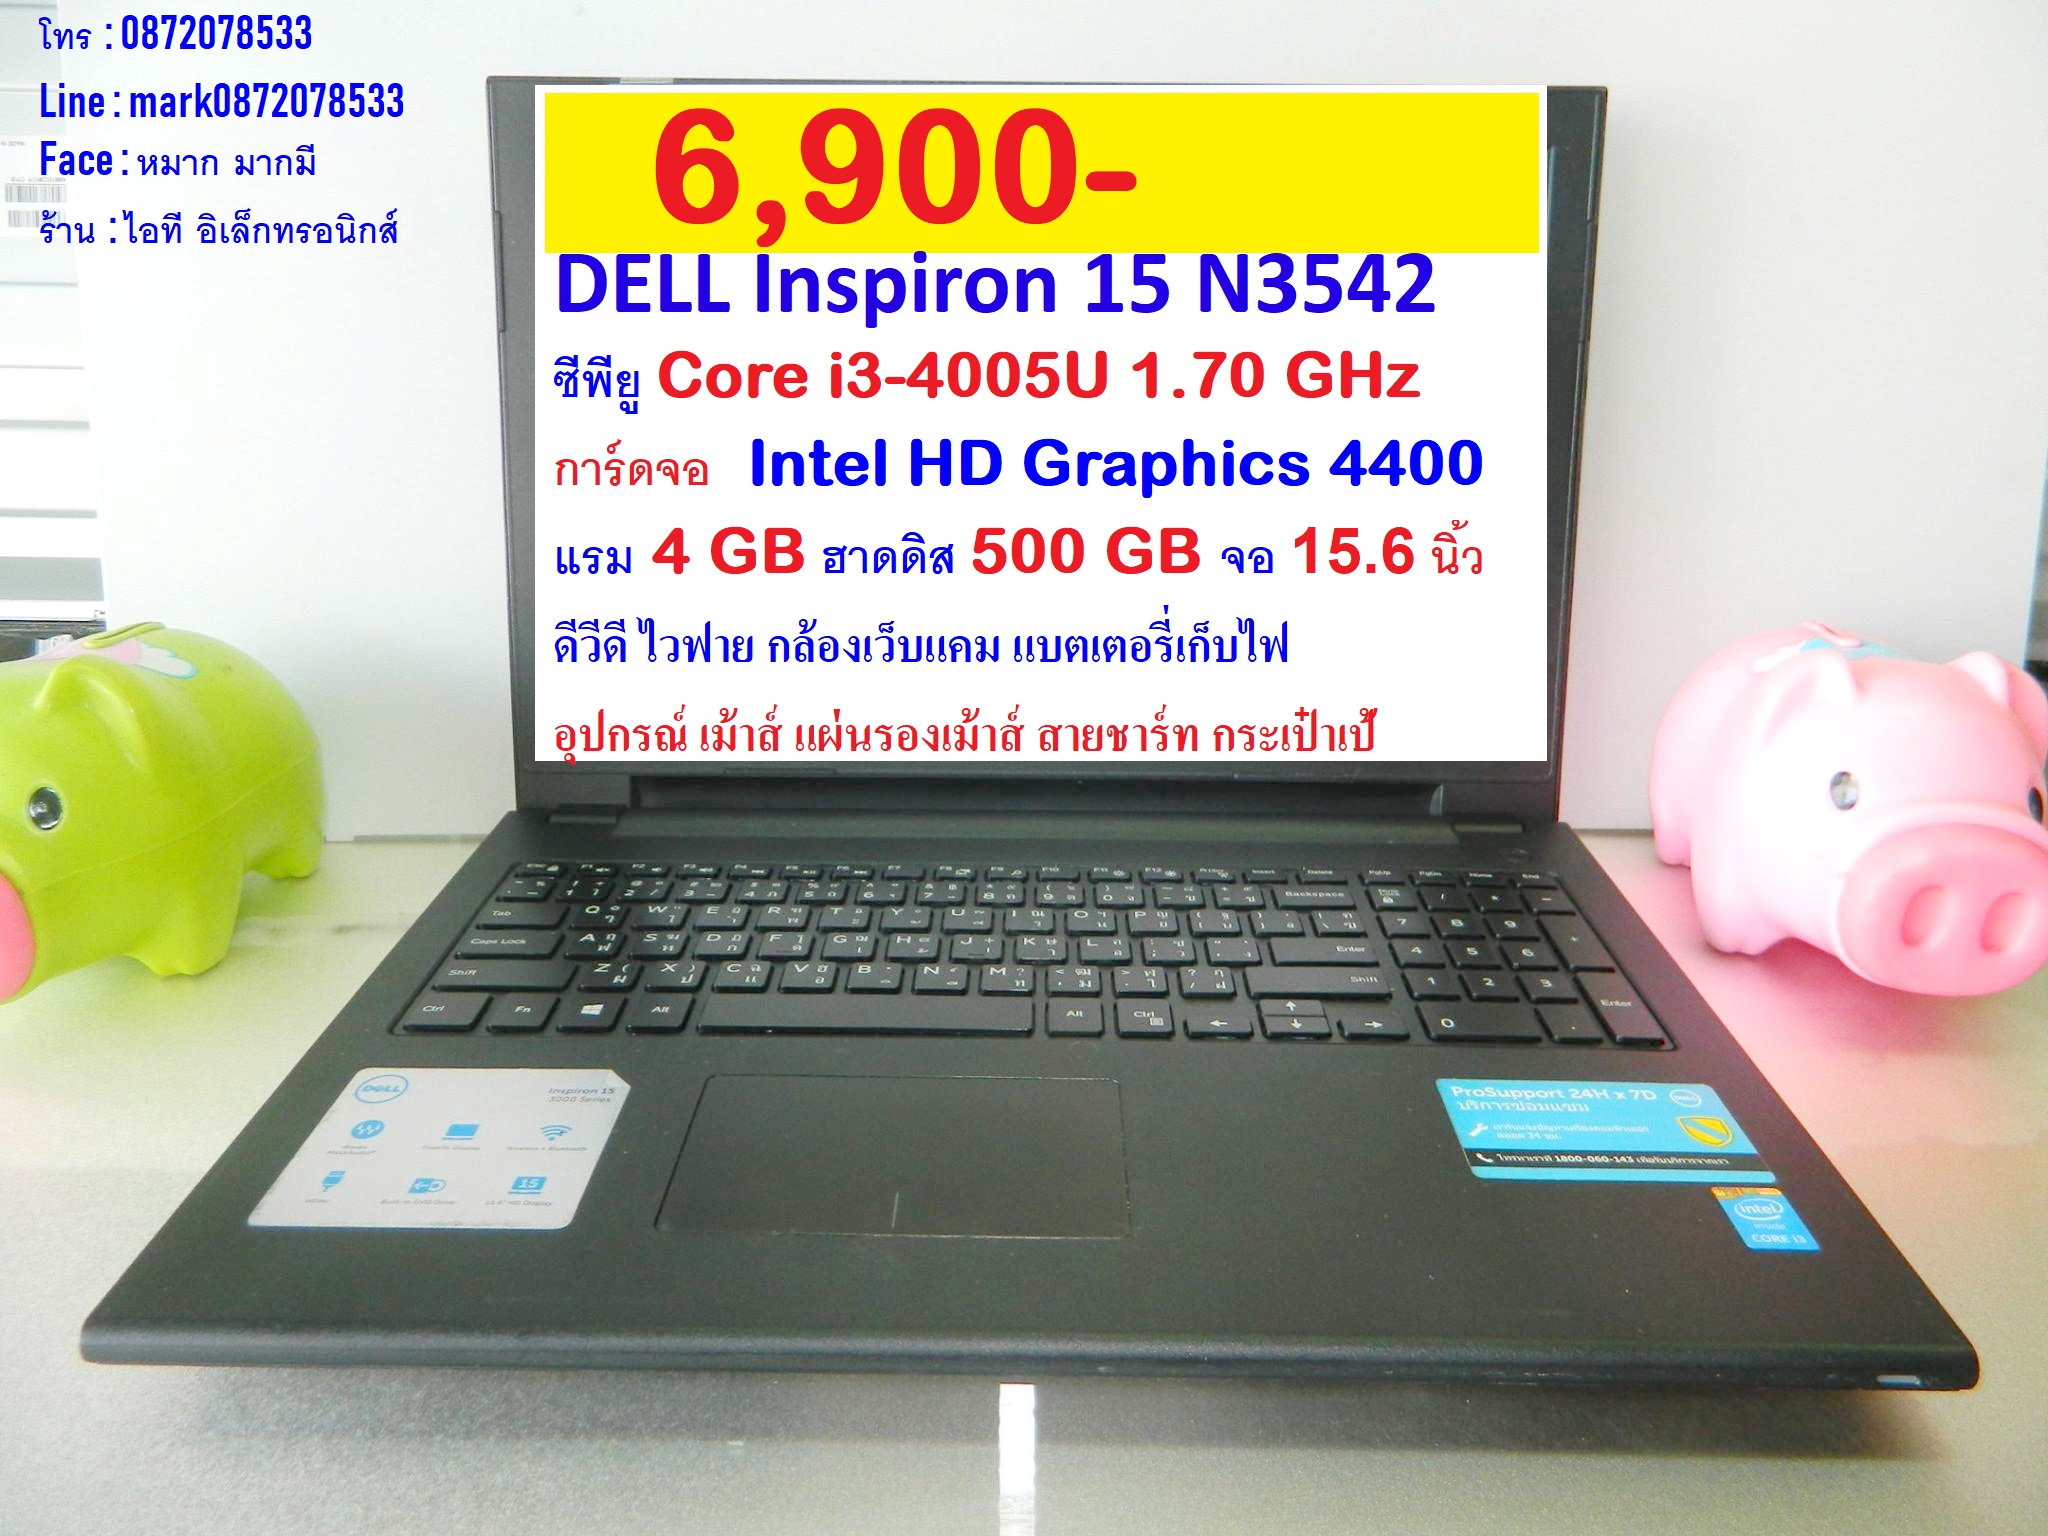 DELL Inspiron 15 N3542 รูปที่ 1